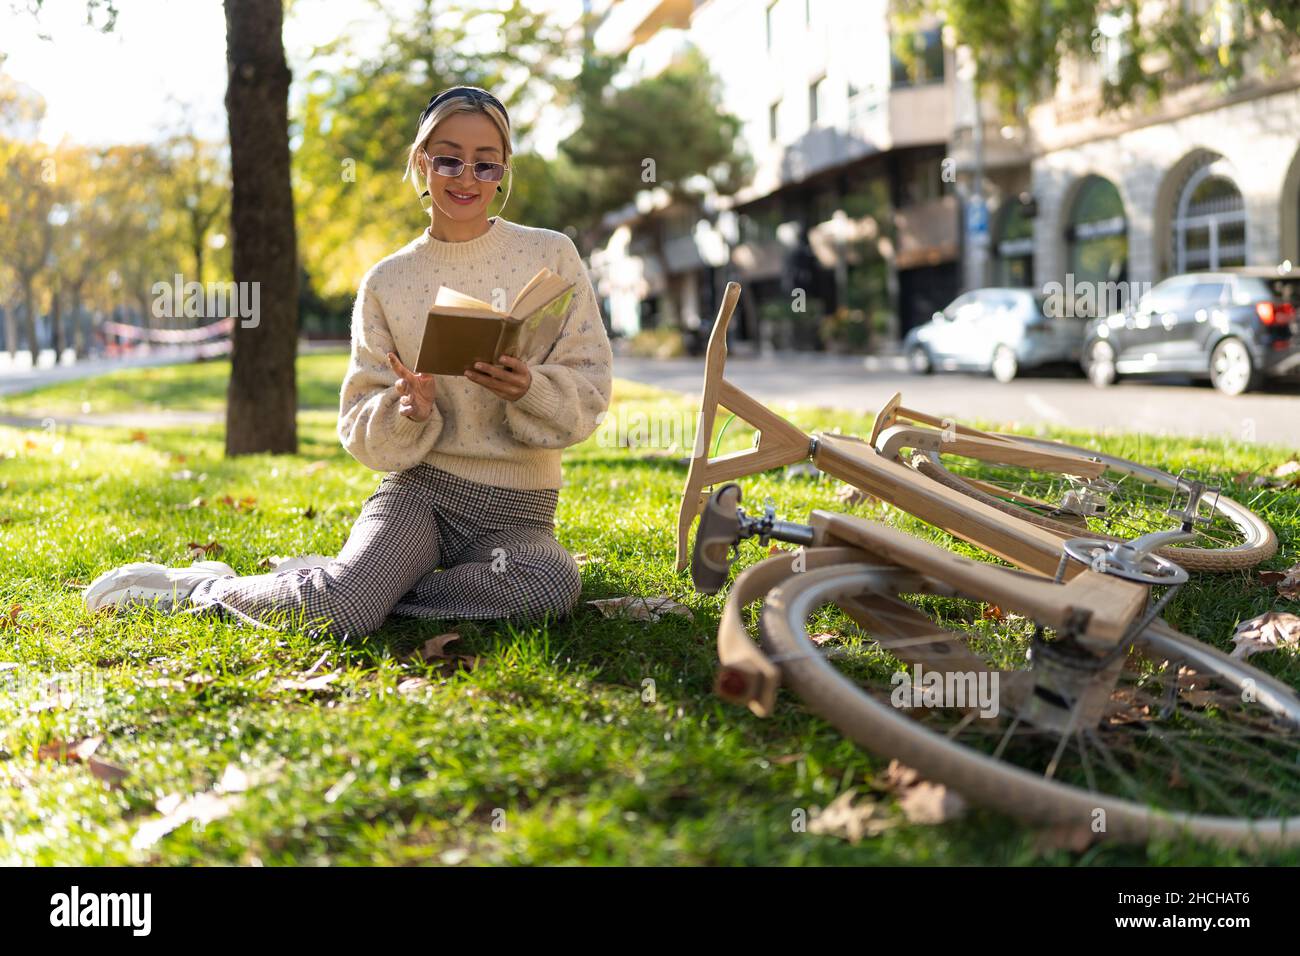 Full body of positive young female enjoying reading book while sitting on lawn near timber bicycle Stock Photo